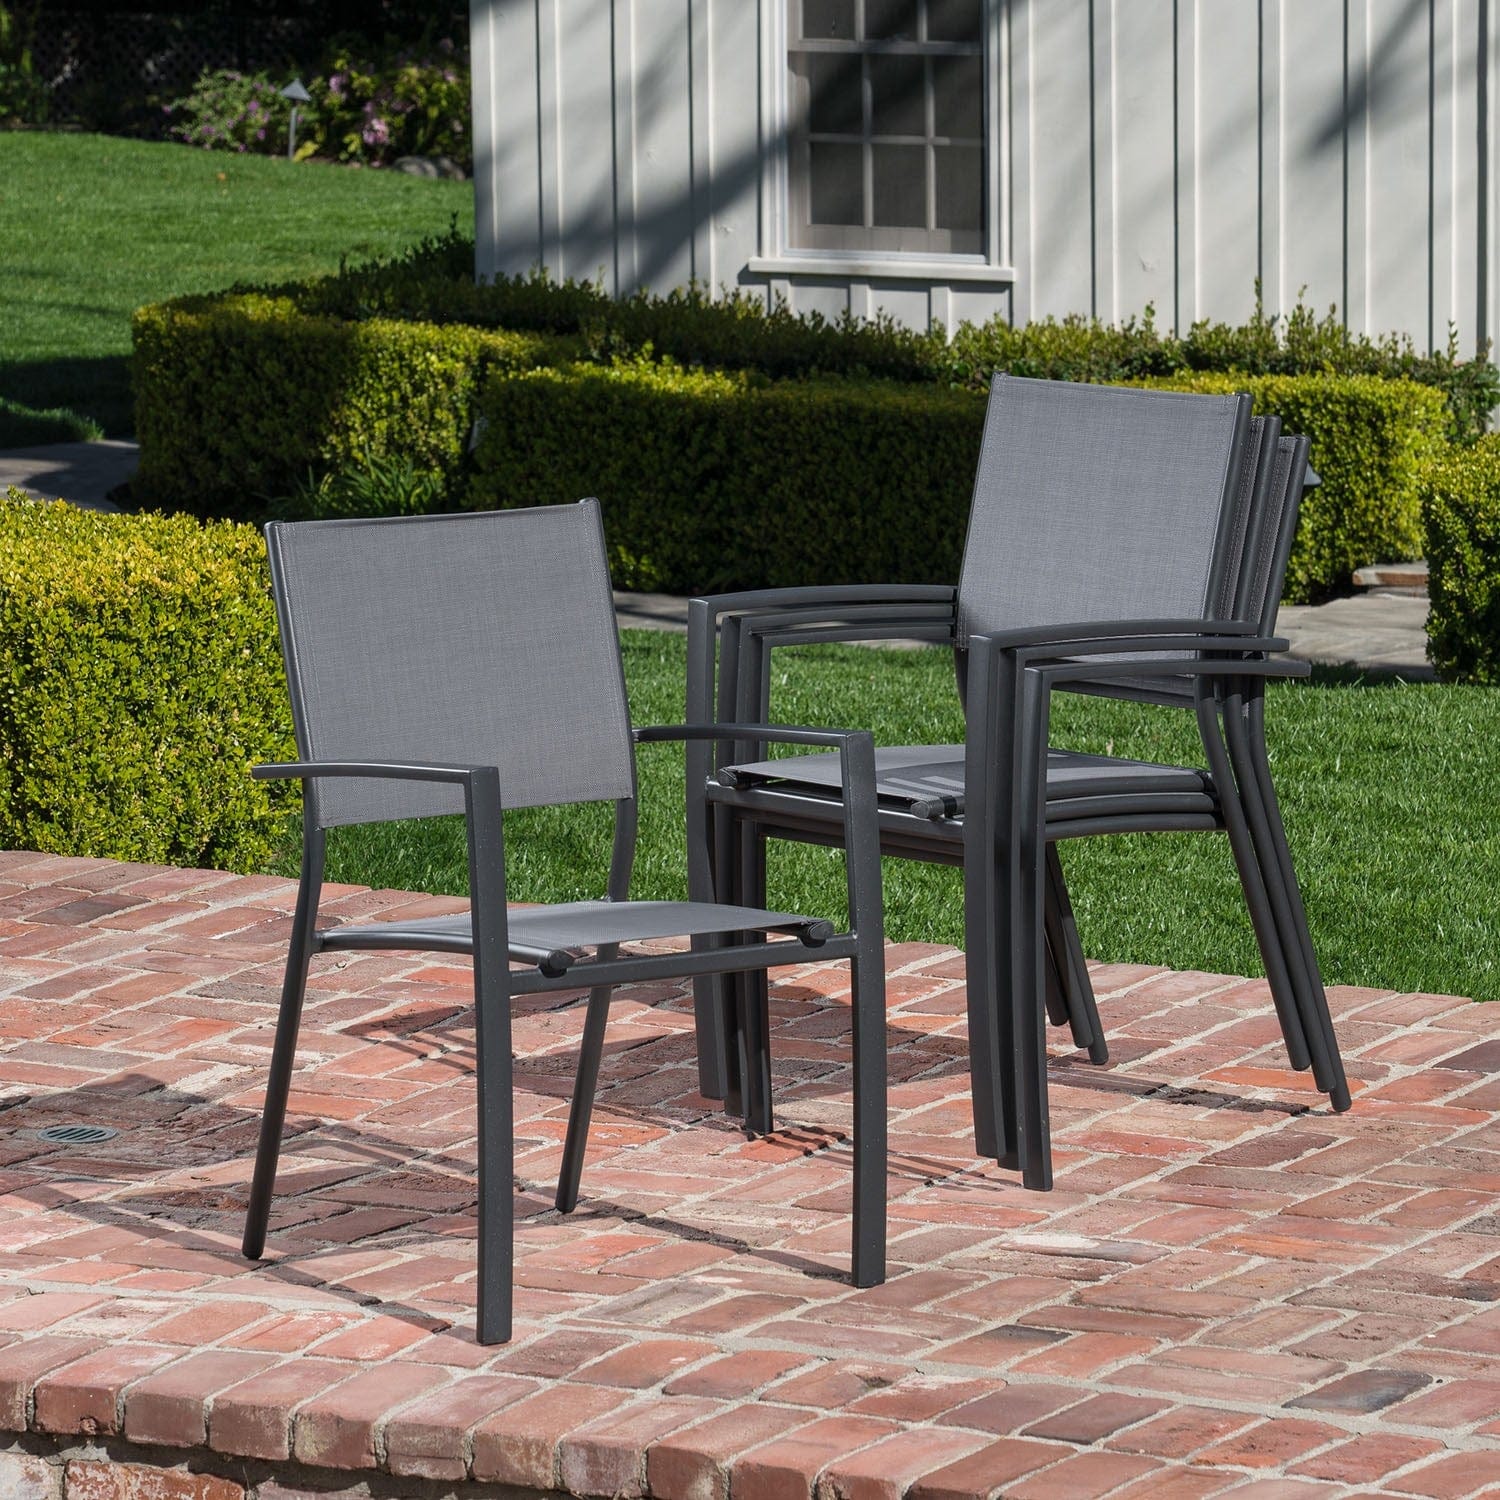 Hanover Outdoor Dining Set Hanover Tucson 7-Piece Aluminium Frame Dining Set with 6 Sling Arm Chairs and a Faux Wood Dining Table | TUCSDN7PC-GRY